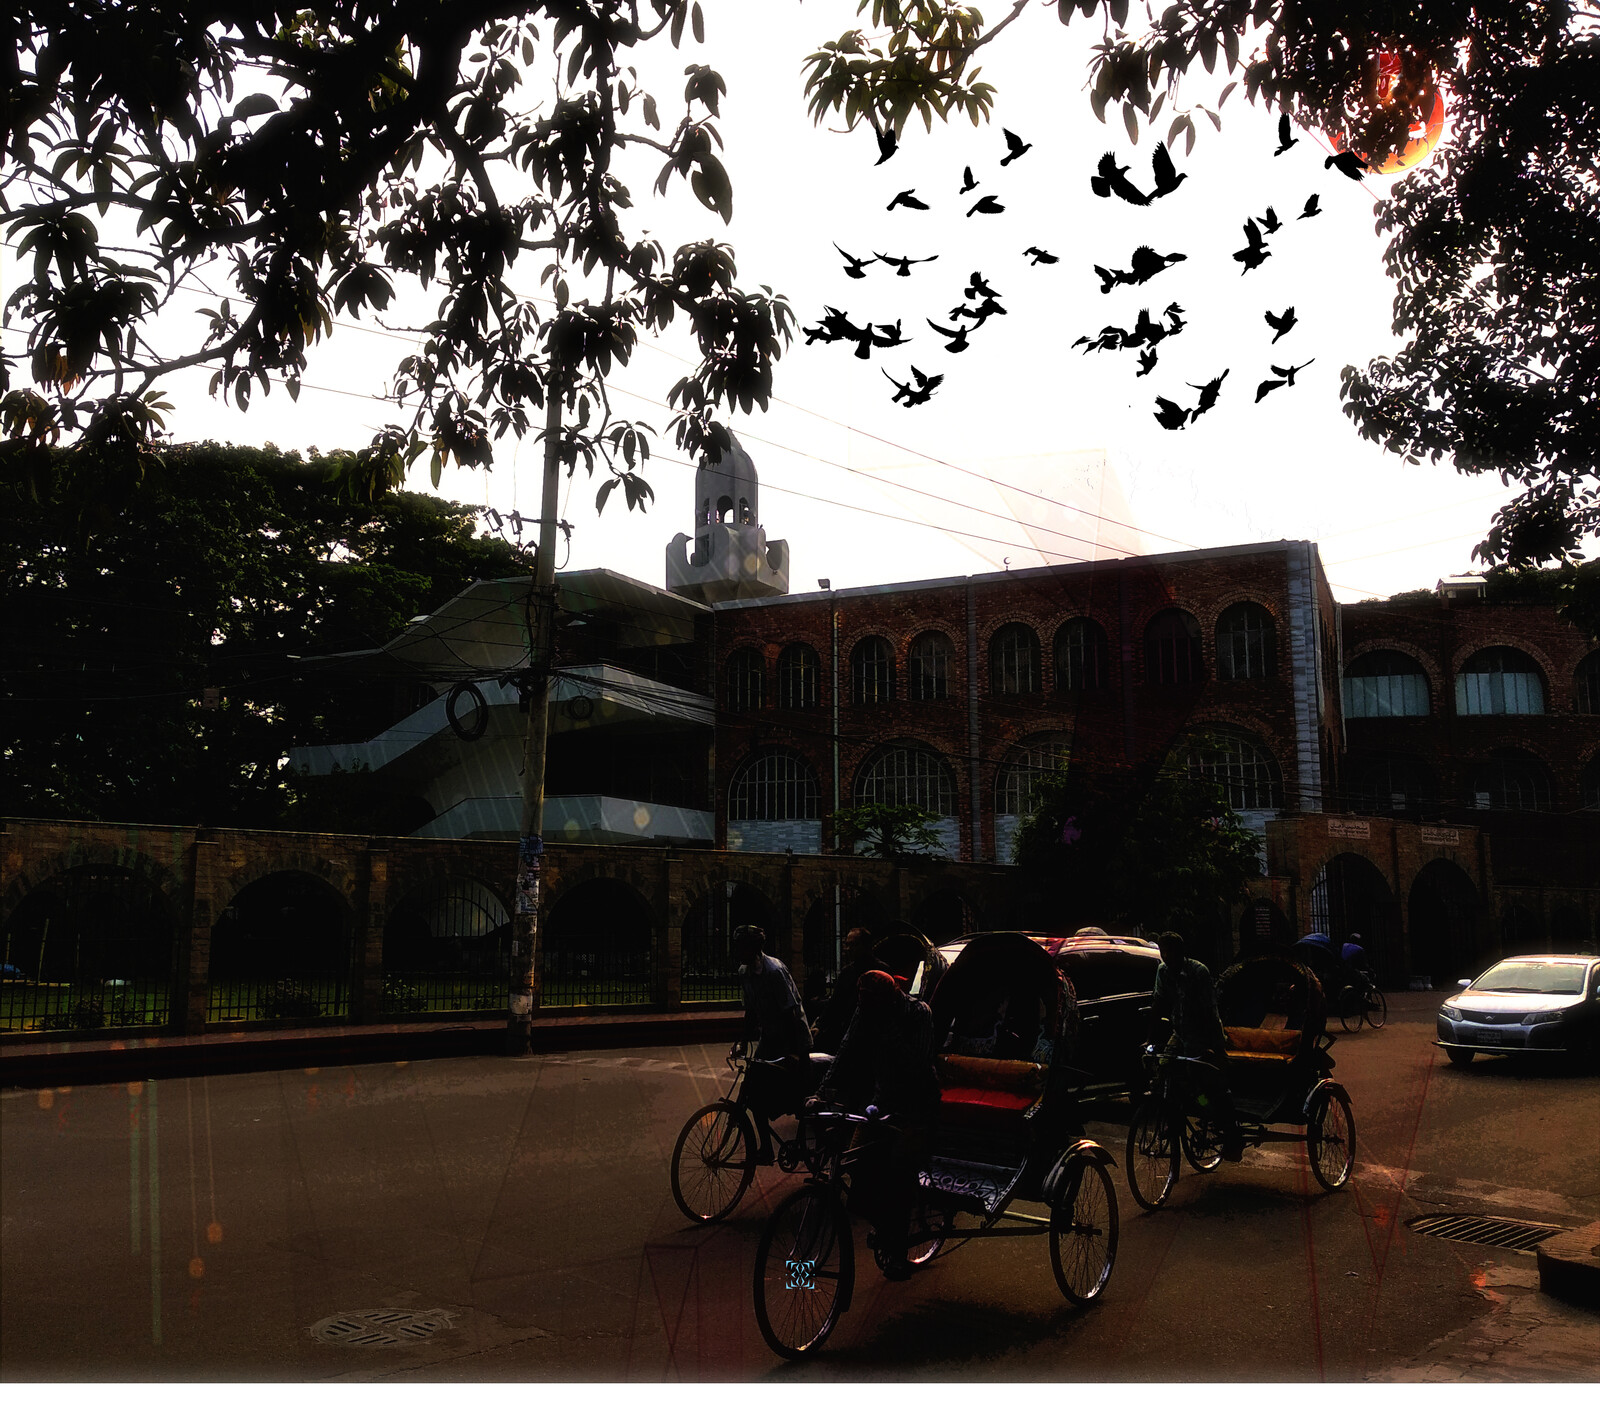 Dhaka_City of Mosques